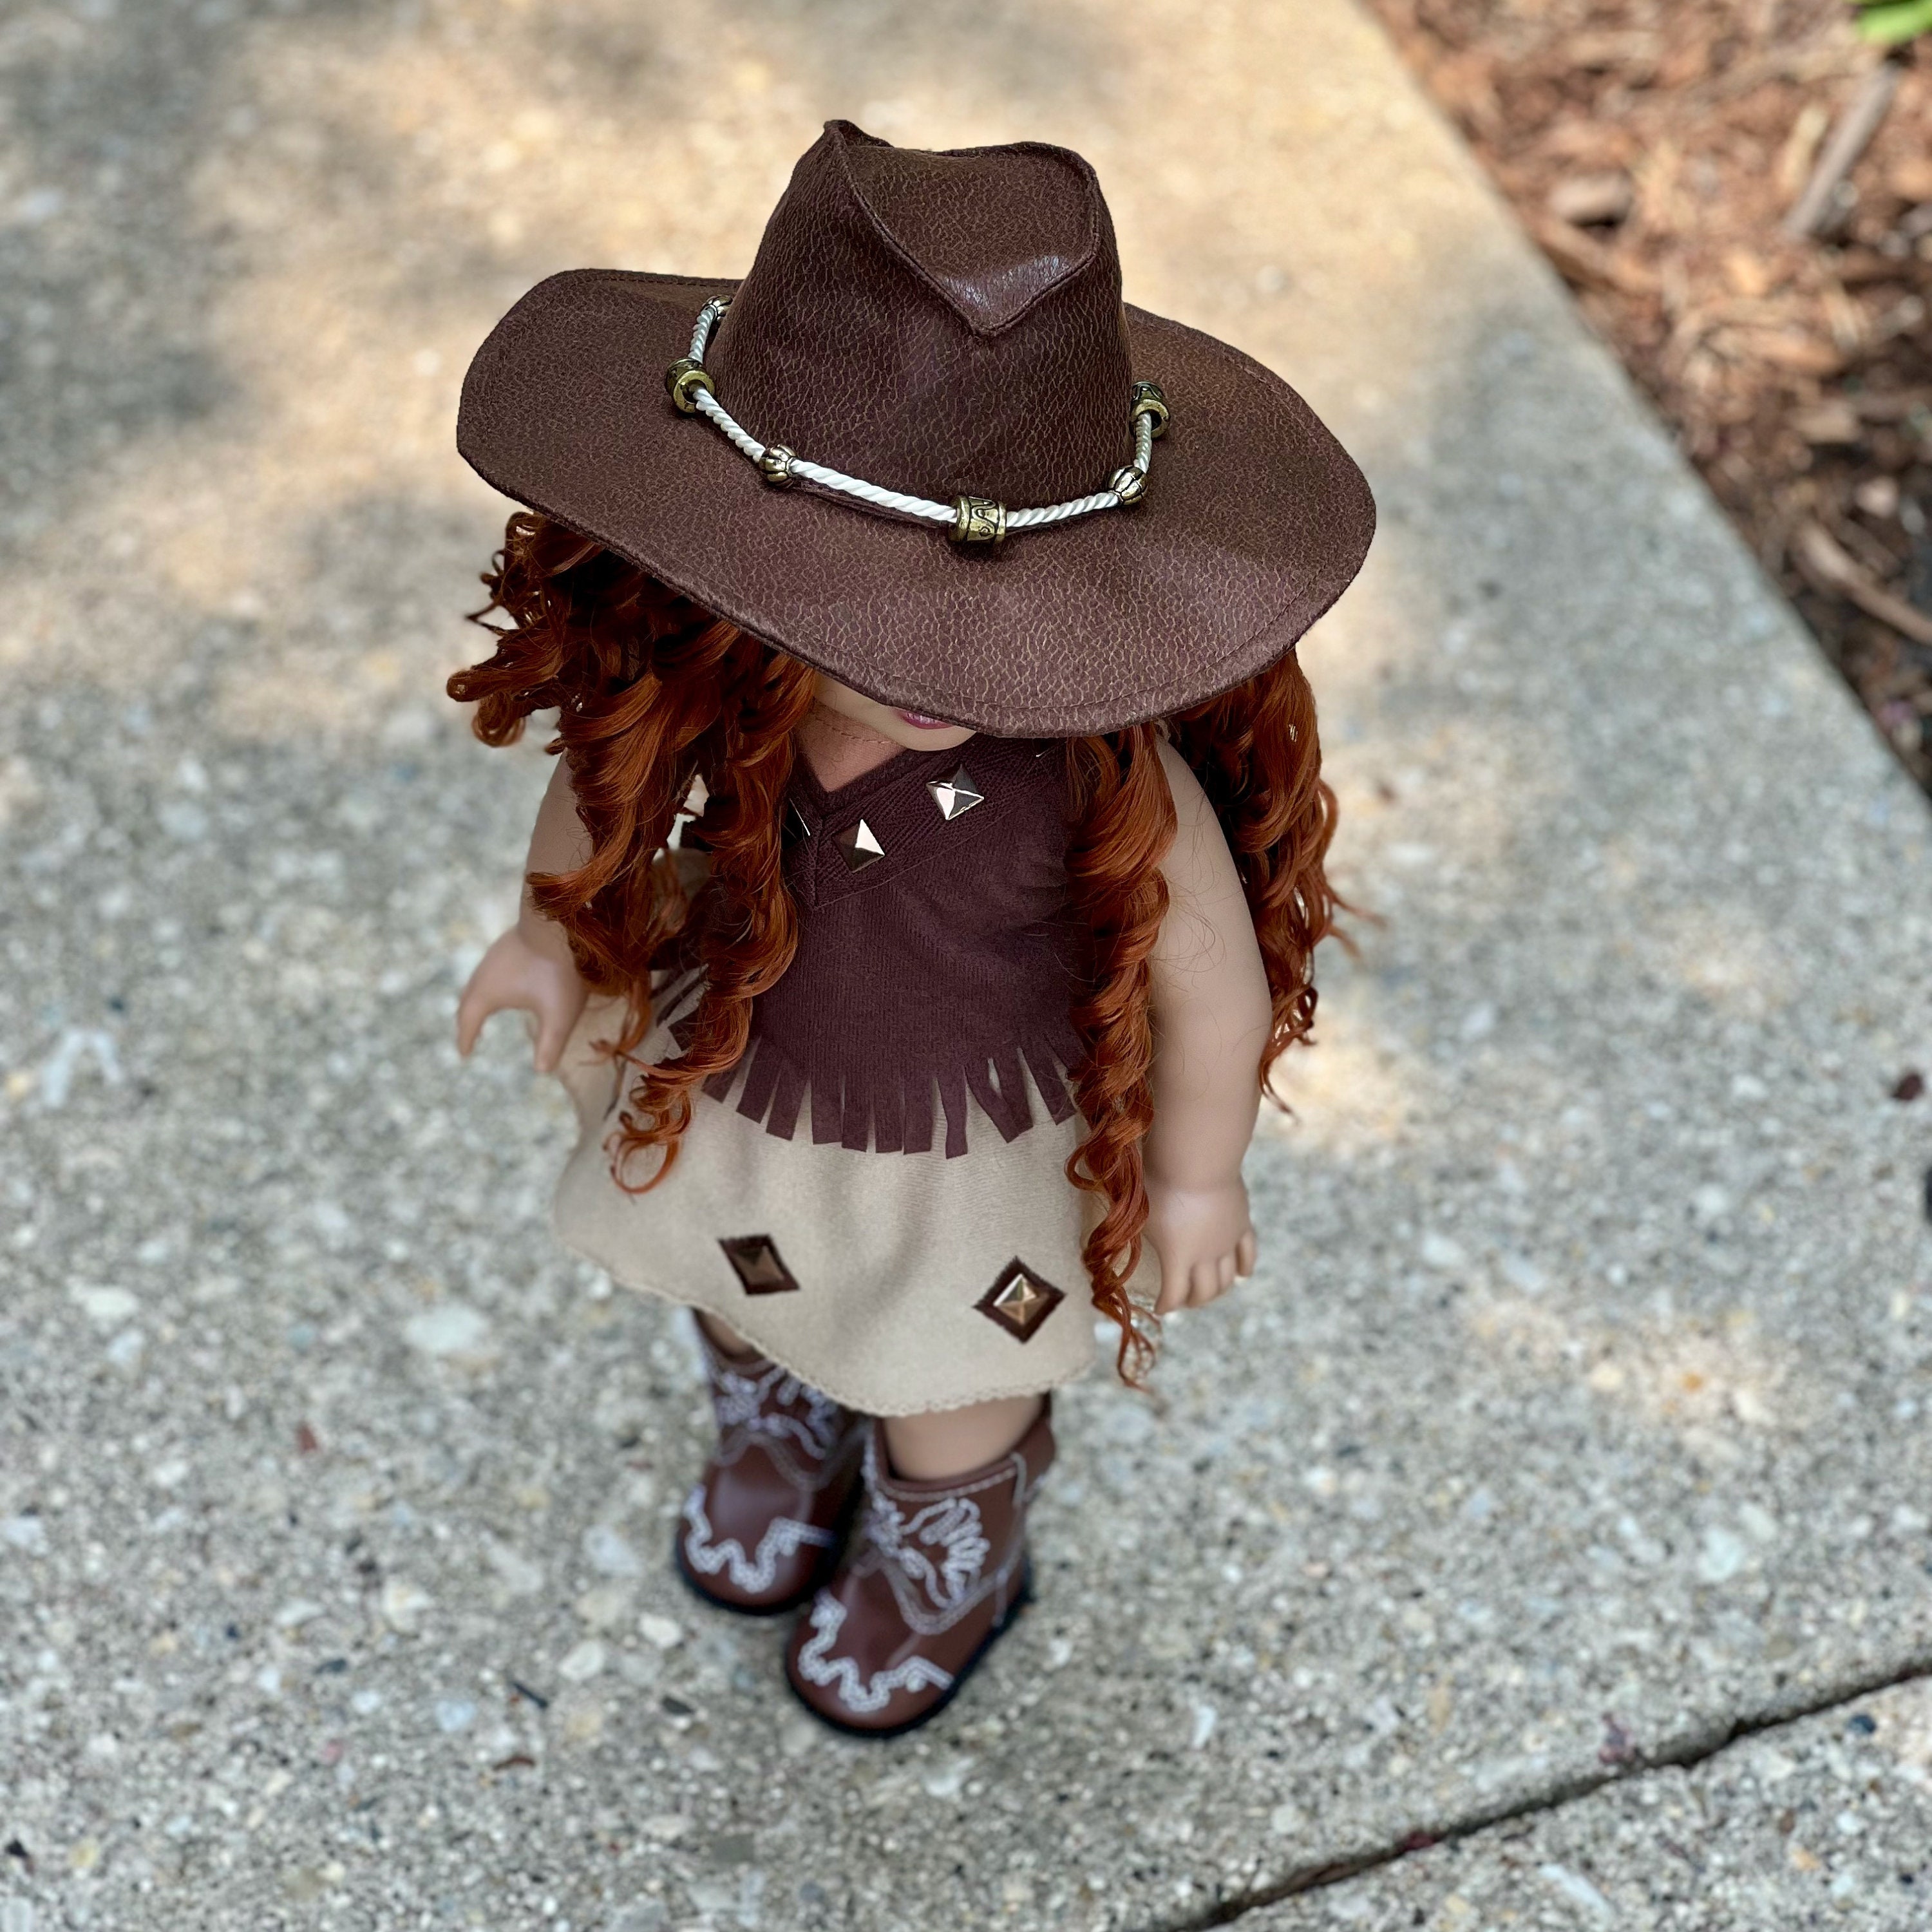 Tan Western Cowboy Hat Accessories fits 18 inch American Girl Doll Clothes